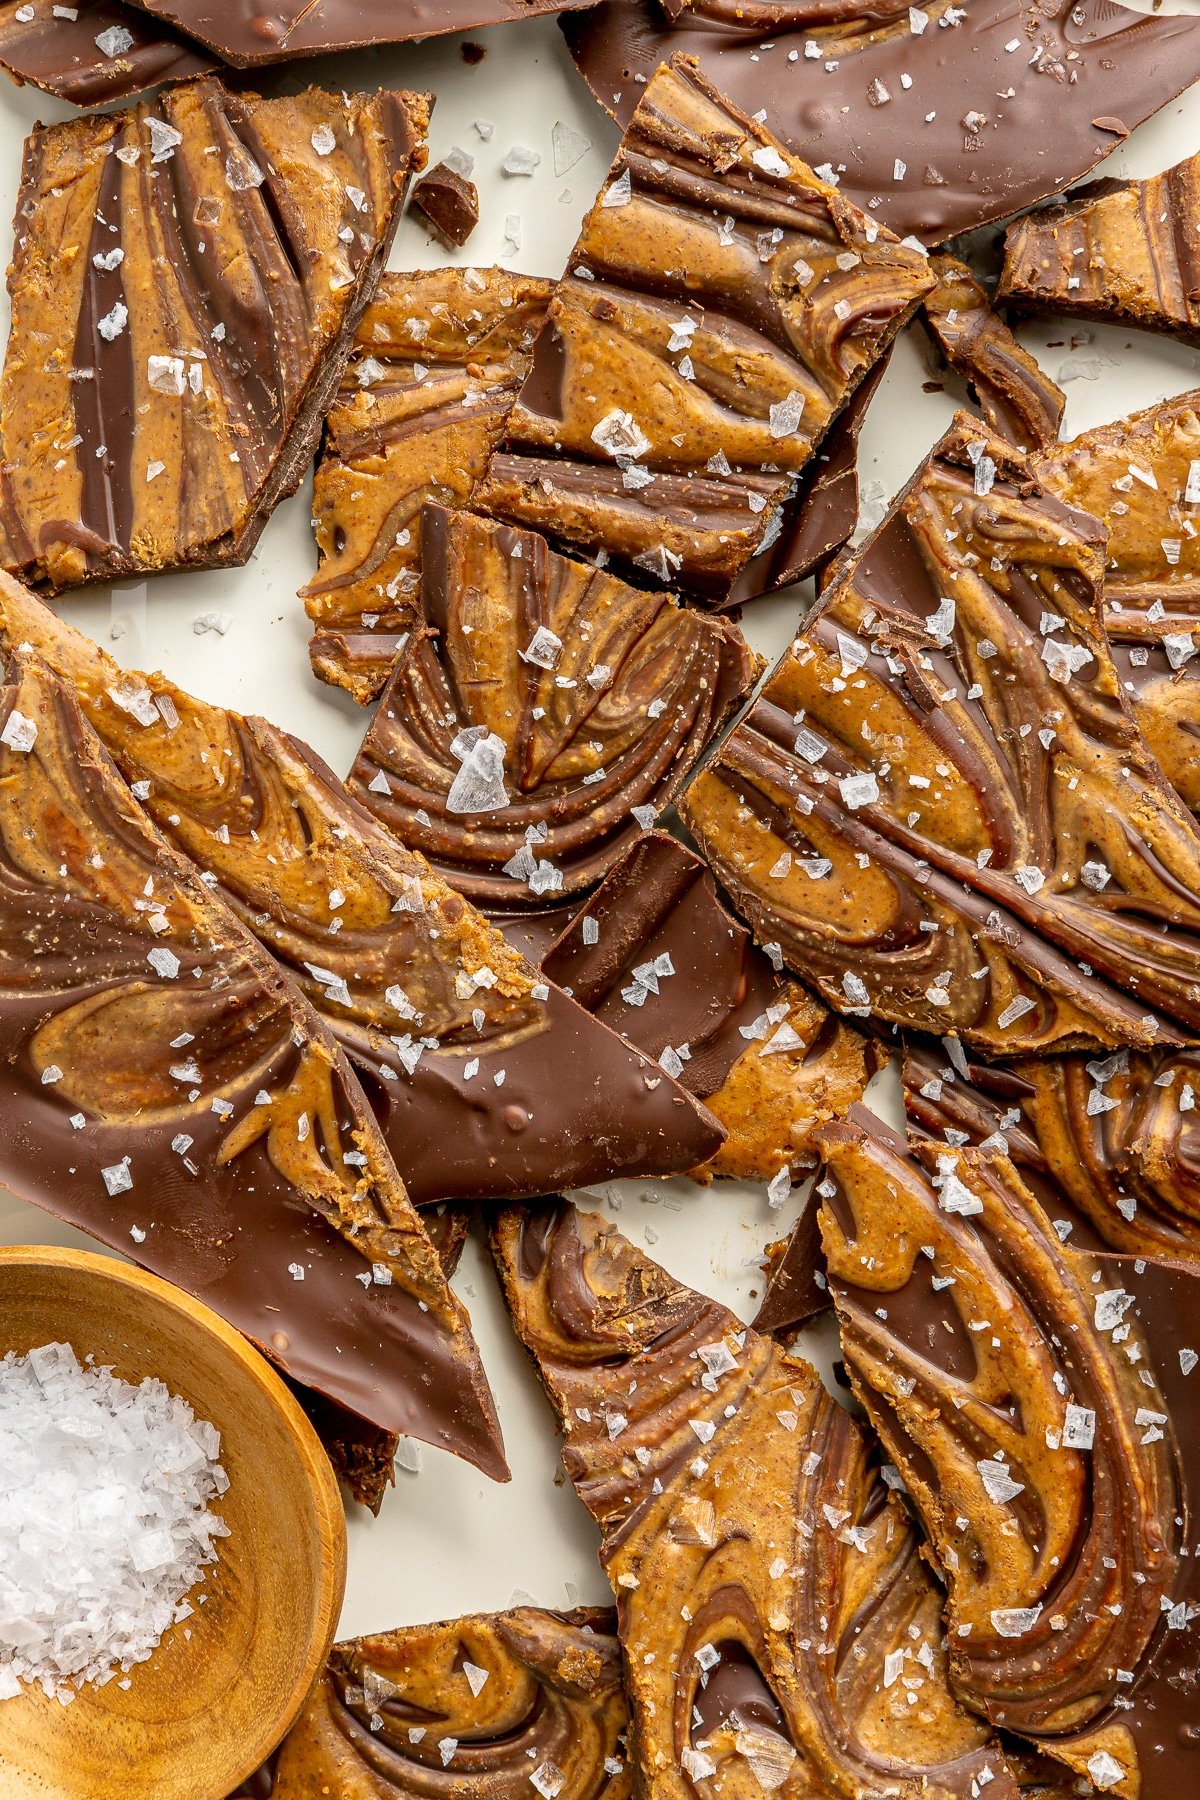 Salted chocolate freezer bark sits on a white tray. A small wooden bowl of flaky sea salt sits to the side.